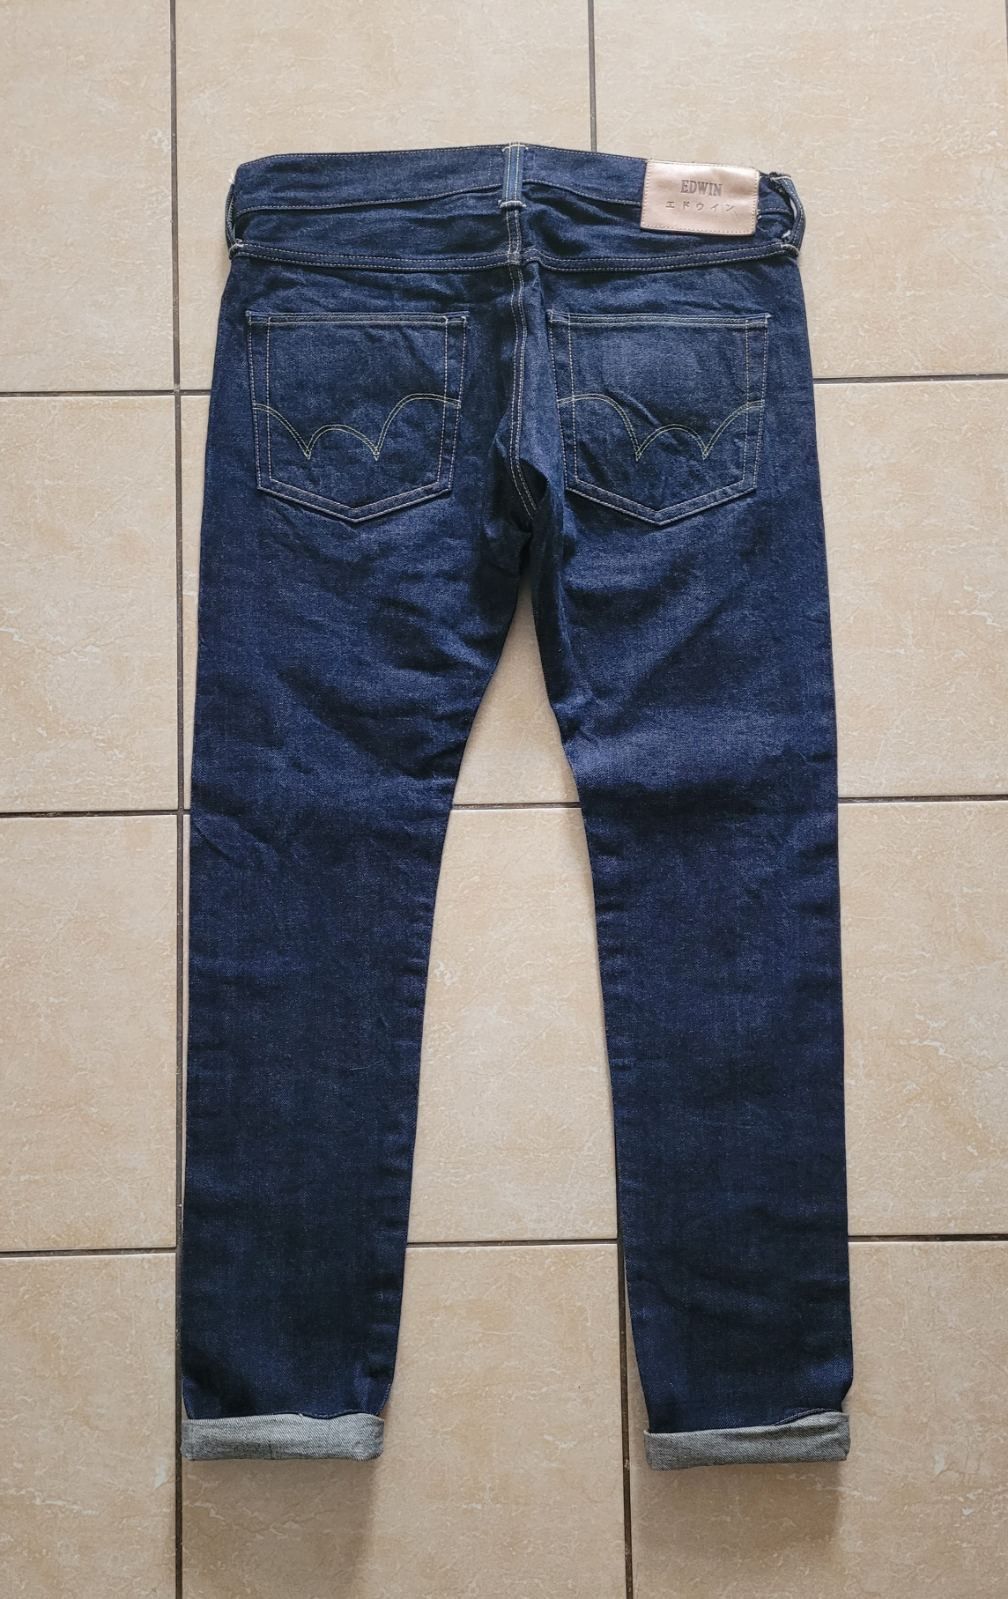 Pre-owned Edwin Ed-55 Selvedge Navy Jeans